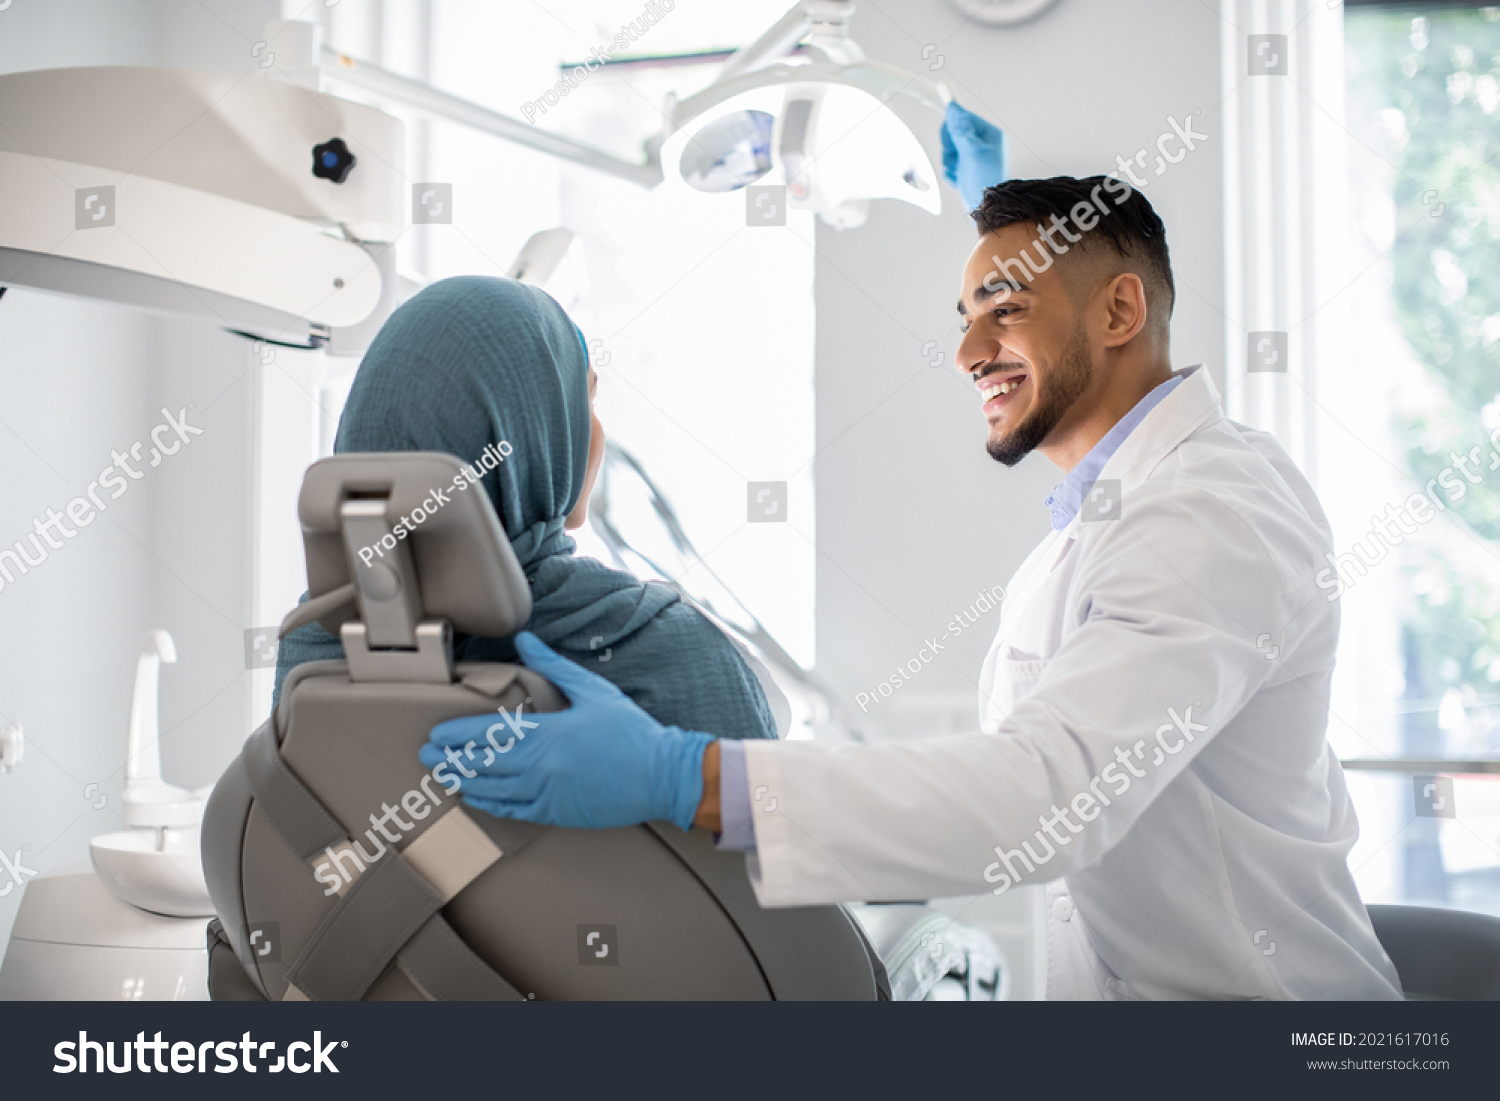 Stock Photo Dental Treatment Arab Dentist Doctor Making Check Up To Muslim Female Patient In Stomatological 2021617016 